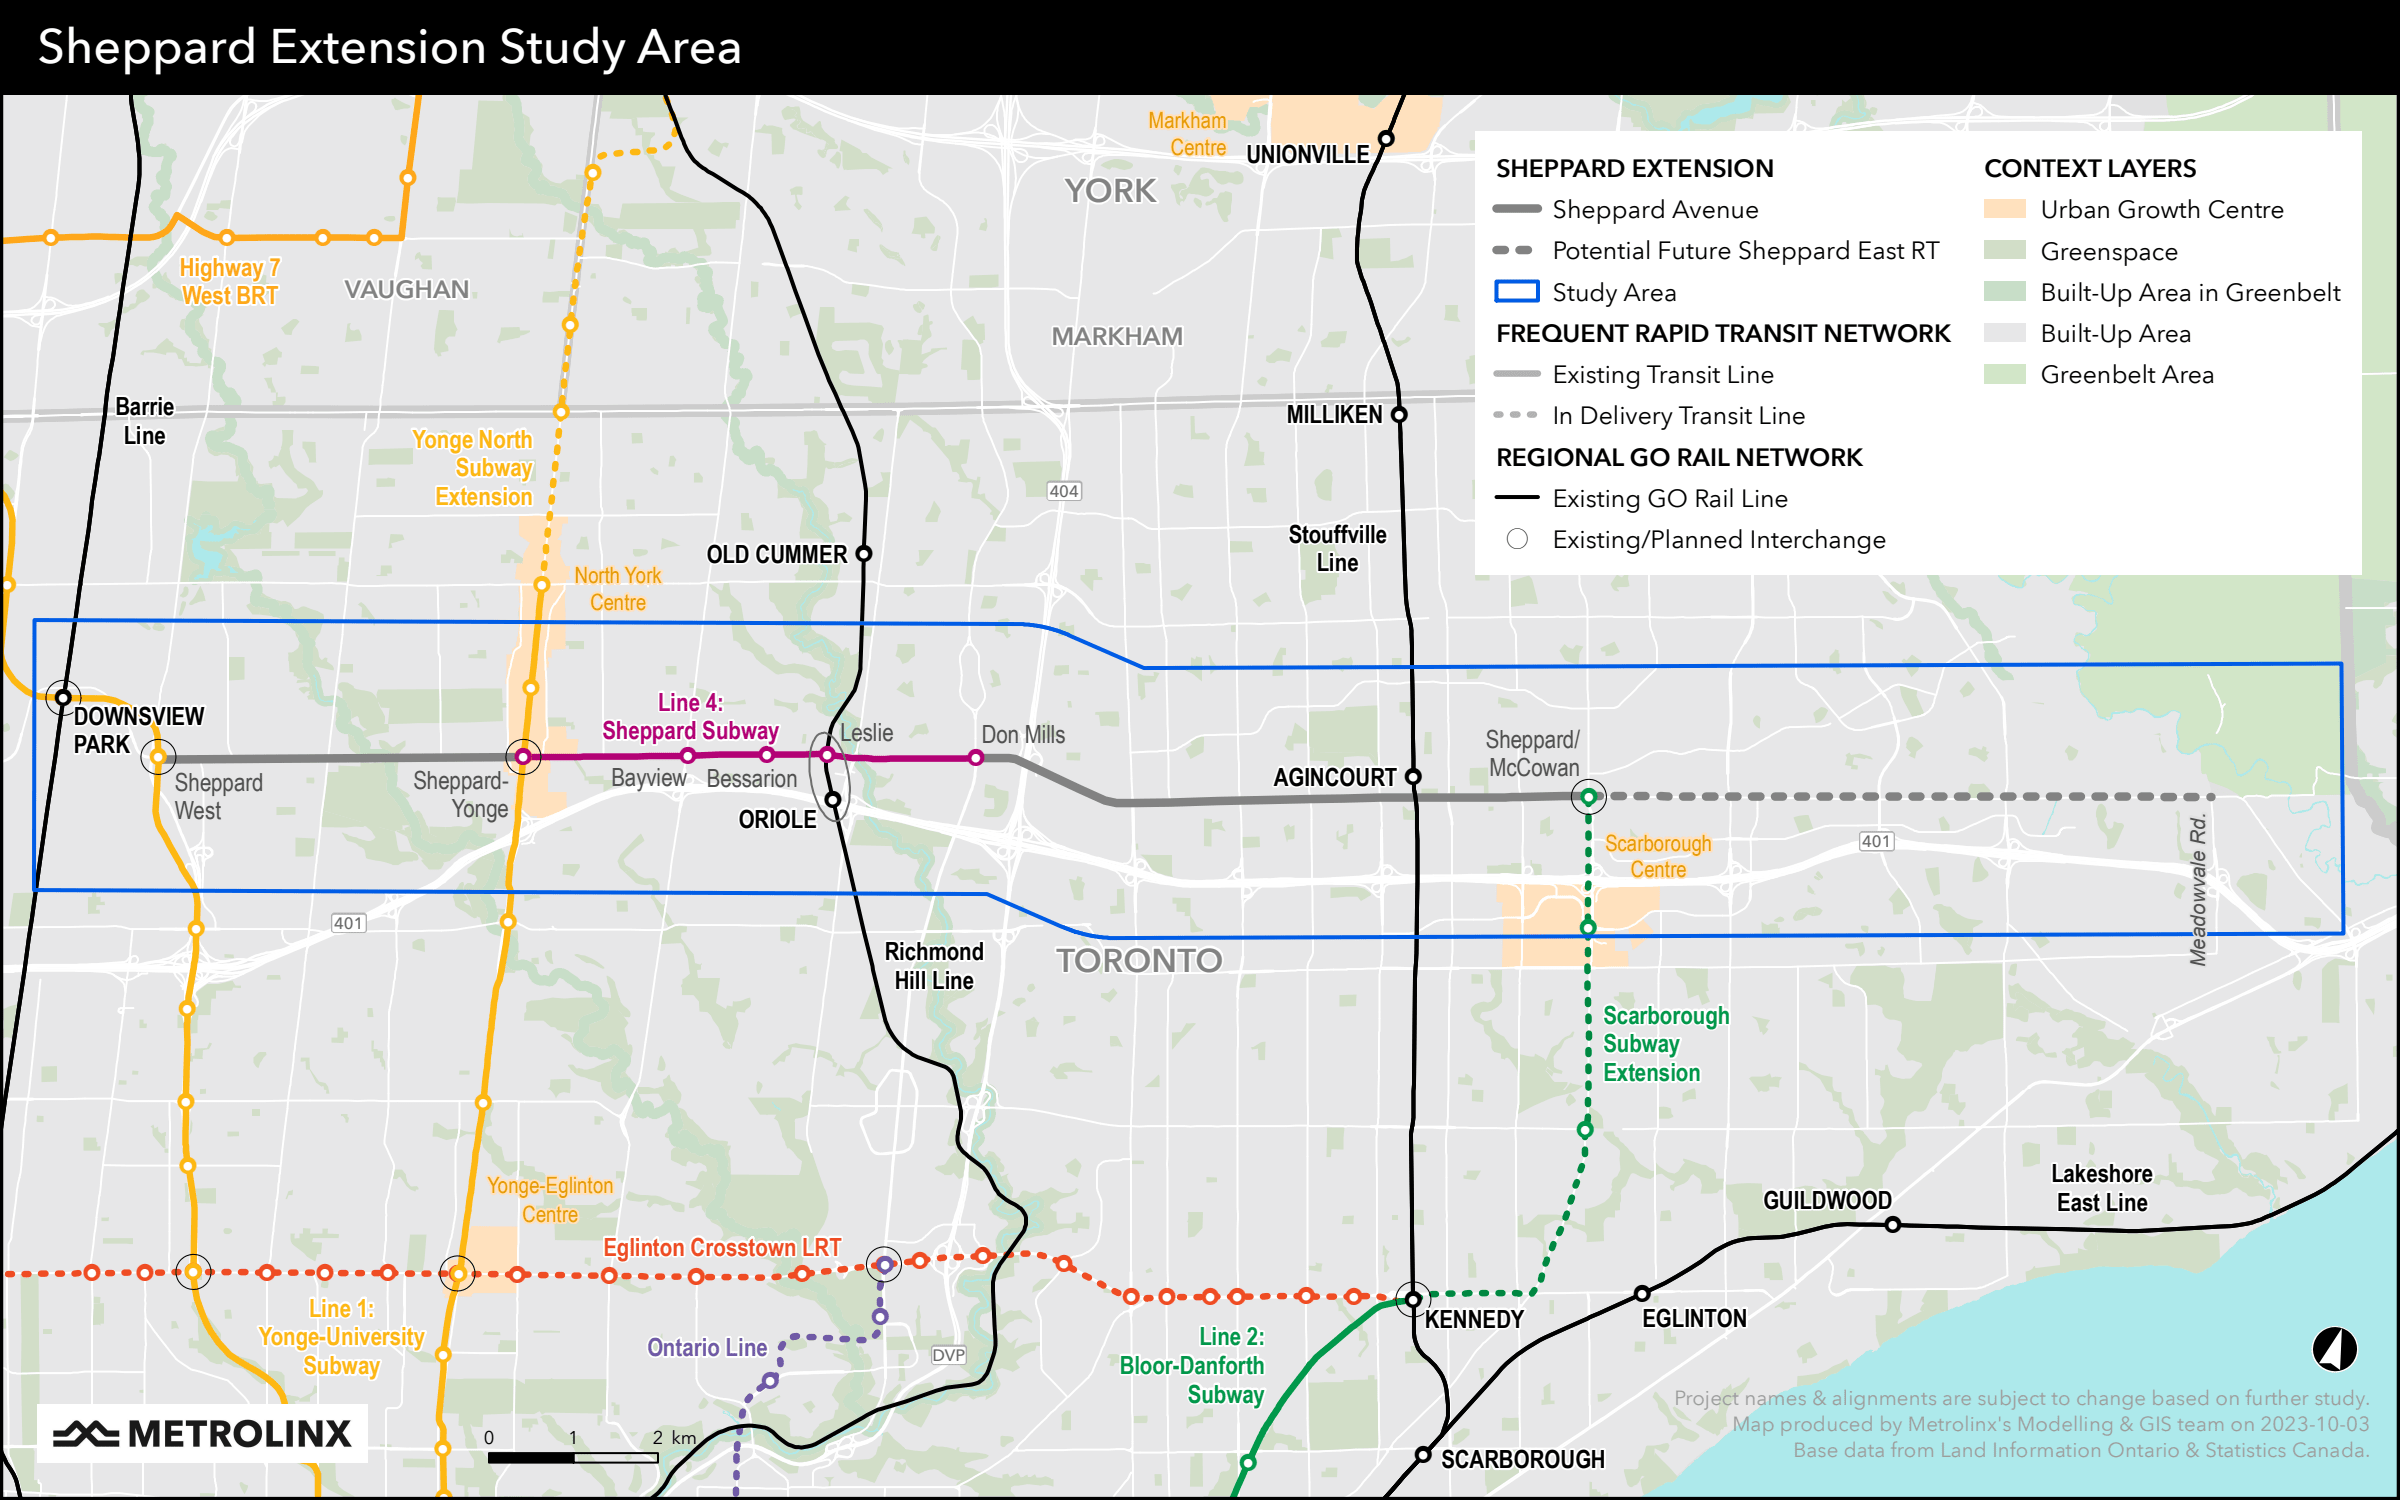 Sheppard Extension Study Area